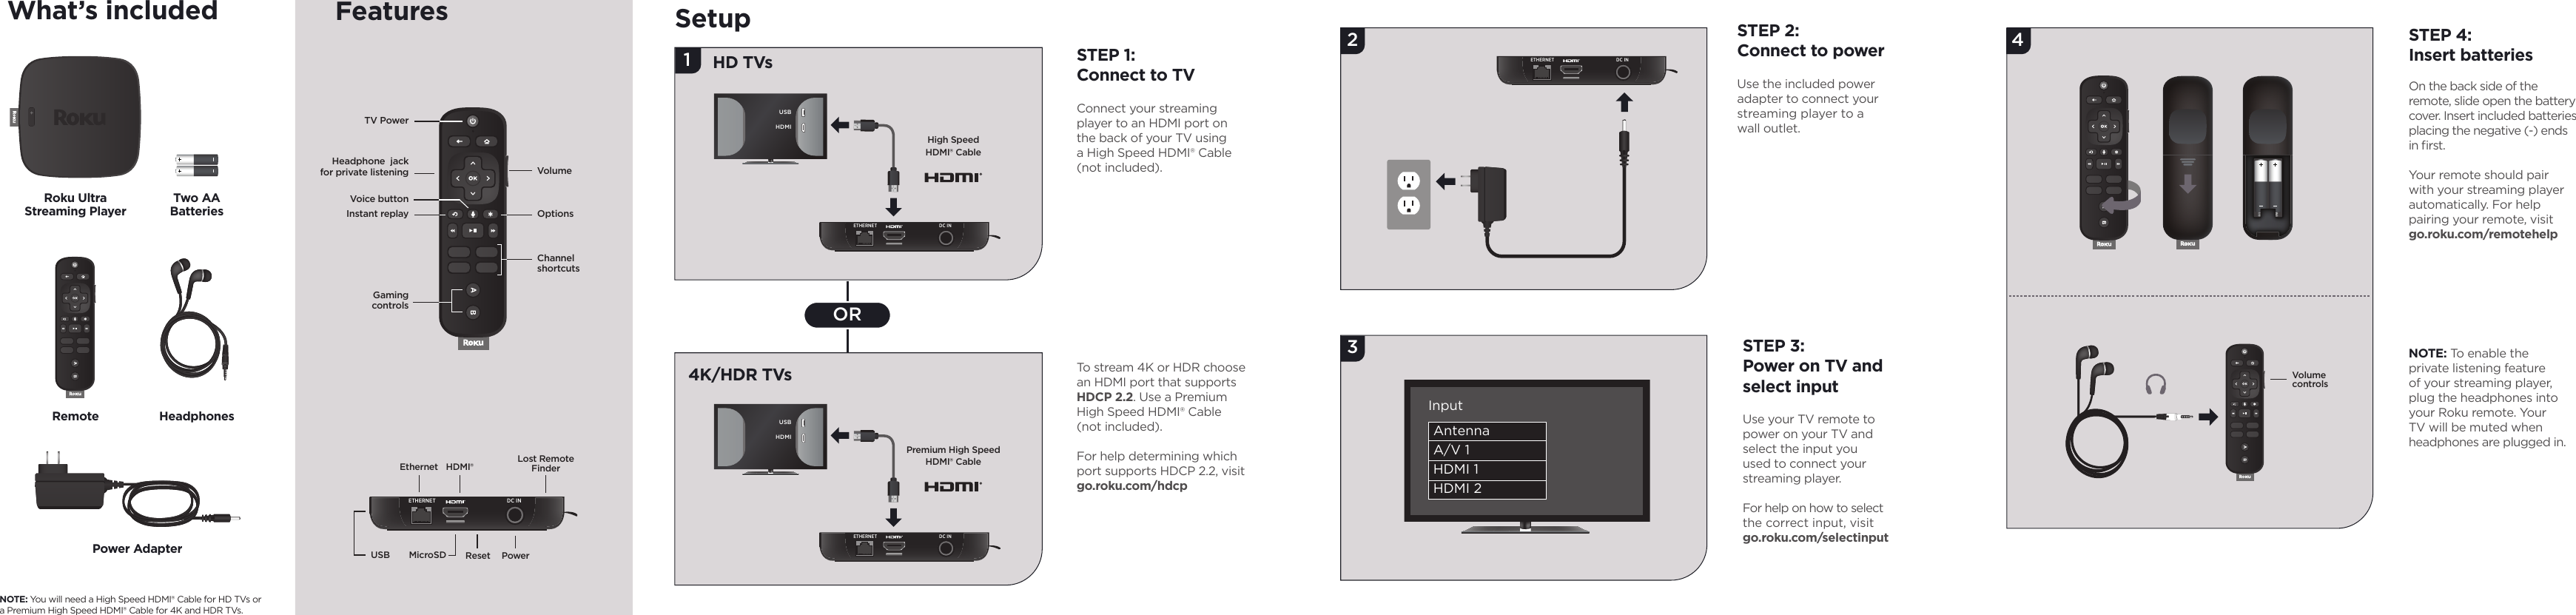 2341ORSTEP 2:Connect to powerUse the included power adapter to connect your streaming player to a wall outlet. STEP 3:Power on TV and select inputUse your TV remote to power on your TV and  select the input you used to connect your streaming player.For help on how to select the correct input, visit go.roku.com/selectinputSTEP 4:Insert batteriesOn the back side of the remote, slide open the battery cover. Insert included batteries placing the negative (-) ends in ﬁ rst.Your remote should pair with your streaming player automatically. For help pairing your remote, visitgo.roku.com/remotehelpNOTE: To enable the private listening feature of your streaming player, plug the headphones into your Roku remote. Your TV will be muted when headphones are plugged in.SetupETHERNET DC INETHERNET DC INSTEP 1:Connect to TVConnect your streaming player to an HDMI  port on the back of your TV using a High Speed HDMI® Cable (not included).To stream 4K or HDR choose an HDMI port that supports HDCP 2.2. Use a Premium High Speed HDMI® Cable (not included).For help determining which port supports HDCP 2.2, visit go.roku.com/hdcpHD TVs4K/HDR TVs VolumecontrolsPremium High Speed HDMI® CableAntennaA/V 1HDMI 1HDMI 2InputUSBHDMIUSBHDMIETHERNET DC INHigh Speed HDMI® CableWhat’s includedRoku UltraStreaming PlayerPower AdapterHeadphonesRemoteTwo AABatteriesNOTE: You will need a High Speed HDMI® Cable for HD TVs or a Premium High Speed HDMI® Cable for 4K and HDR TVs.ETHERNET DC INUSB MicroSD PowerResetEthernet HDMI® Lost RemoteFinderVolumeChannelshortcutsOptionsTV Power Instant replayHeadphone  jack for private listeningGamingcontrolsVoice buttonFeatures